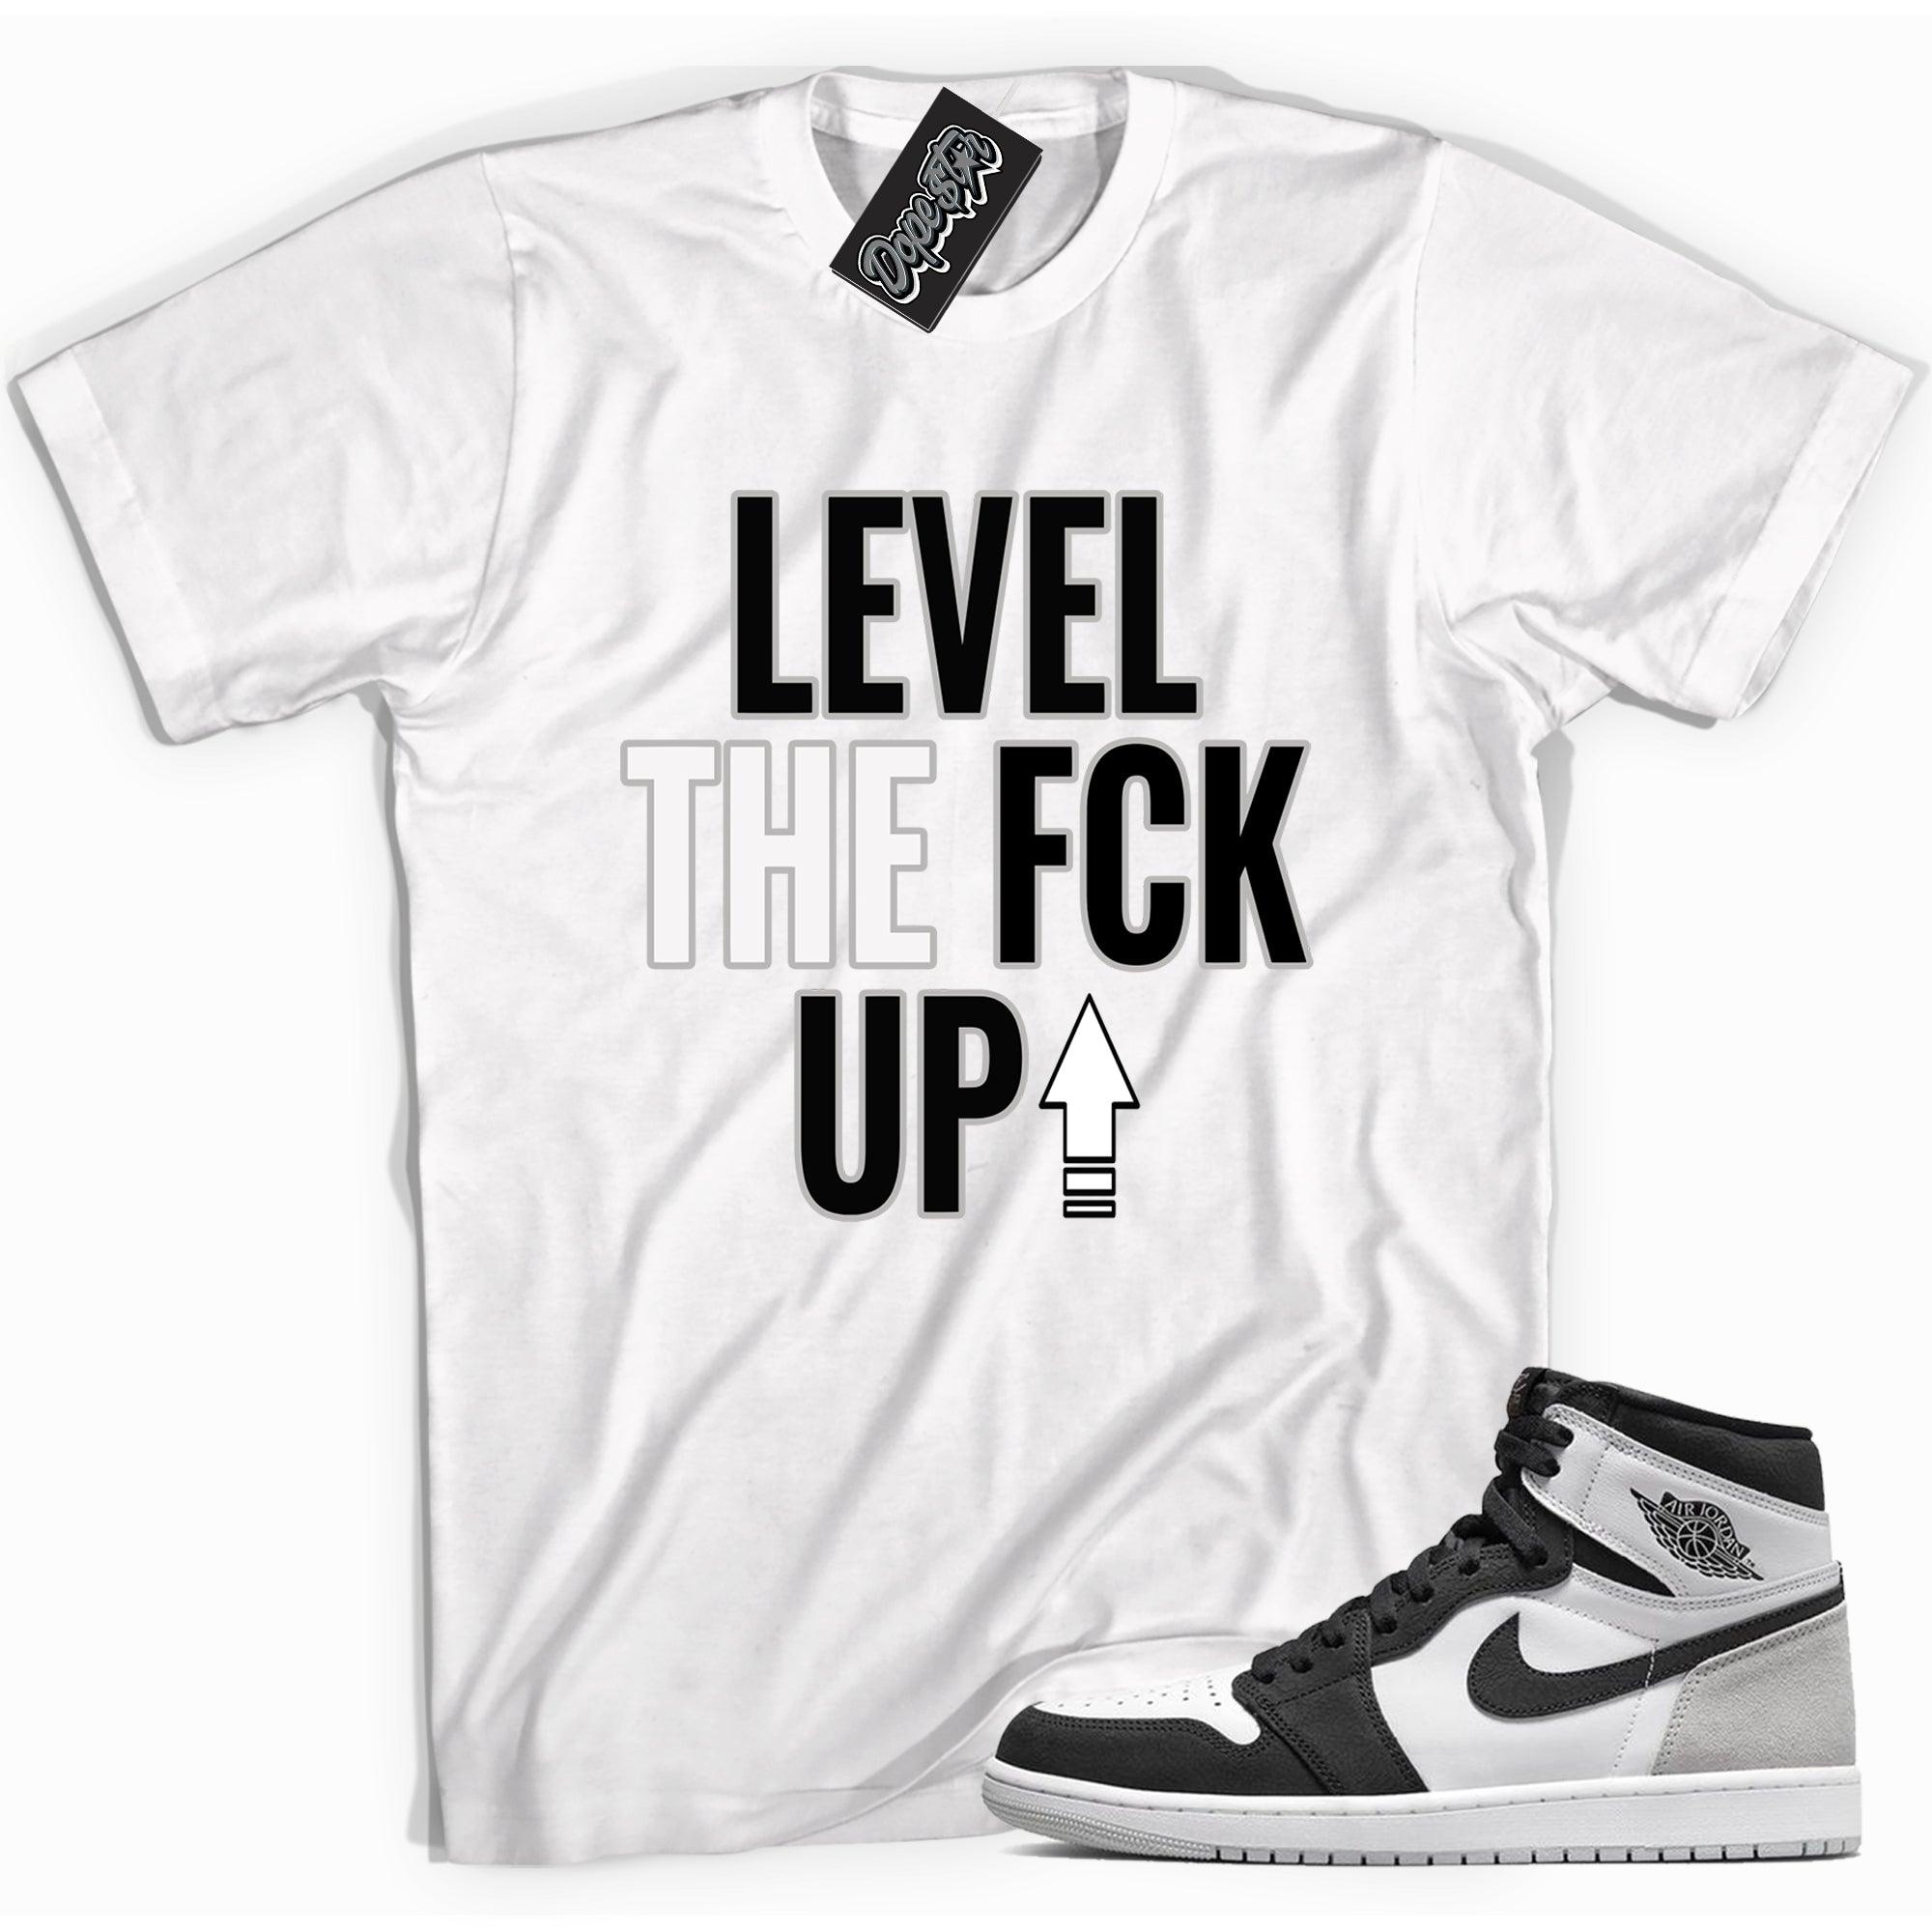 Cool white graphic tee with 'Level Up' print, that perfectly matches Air Jordan 1 Retro High OG Stage Haze sneakers.